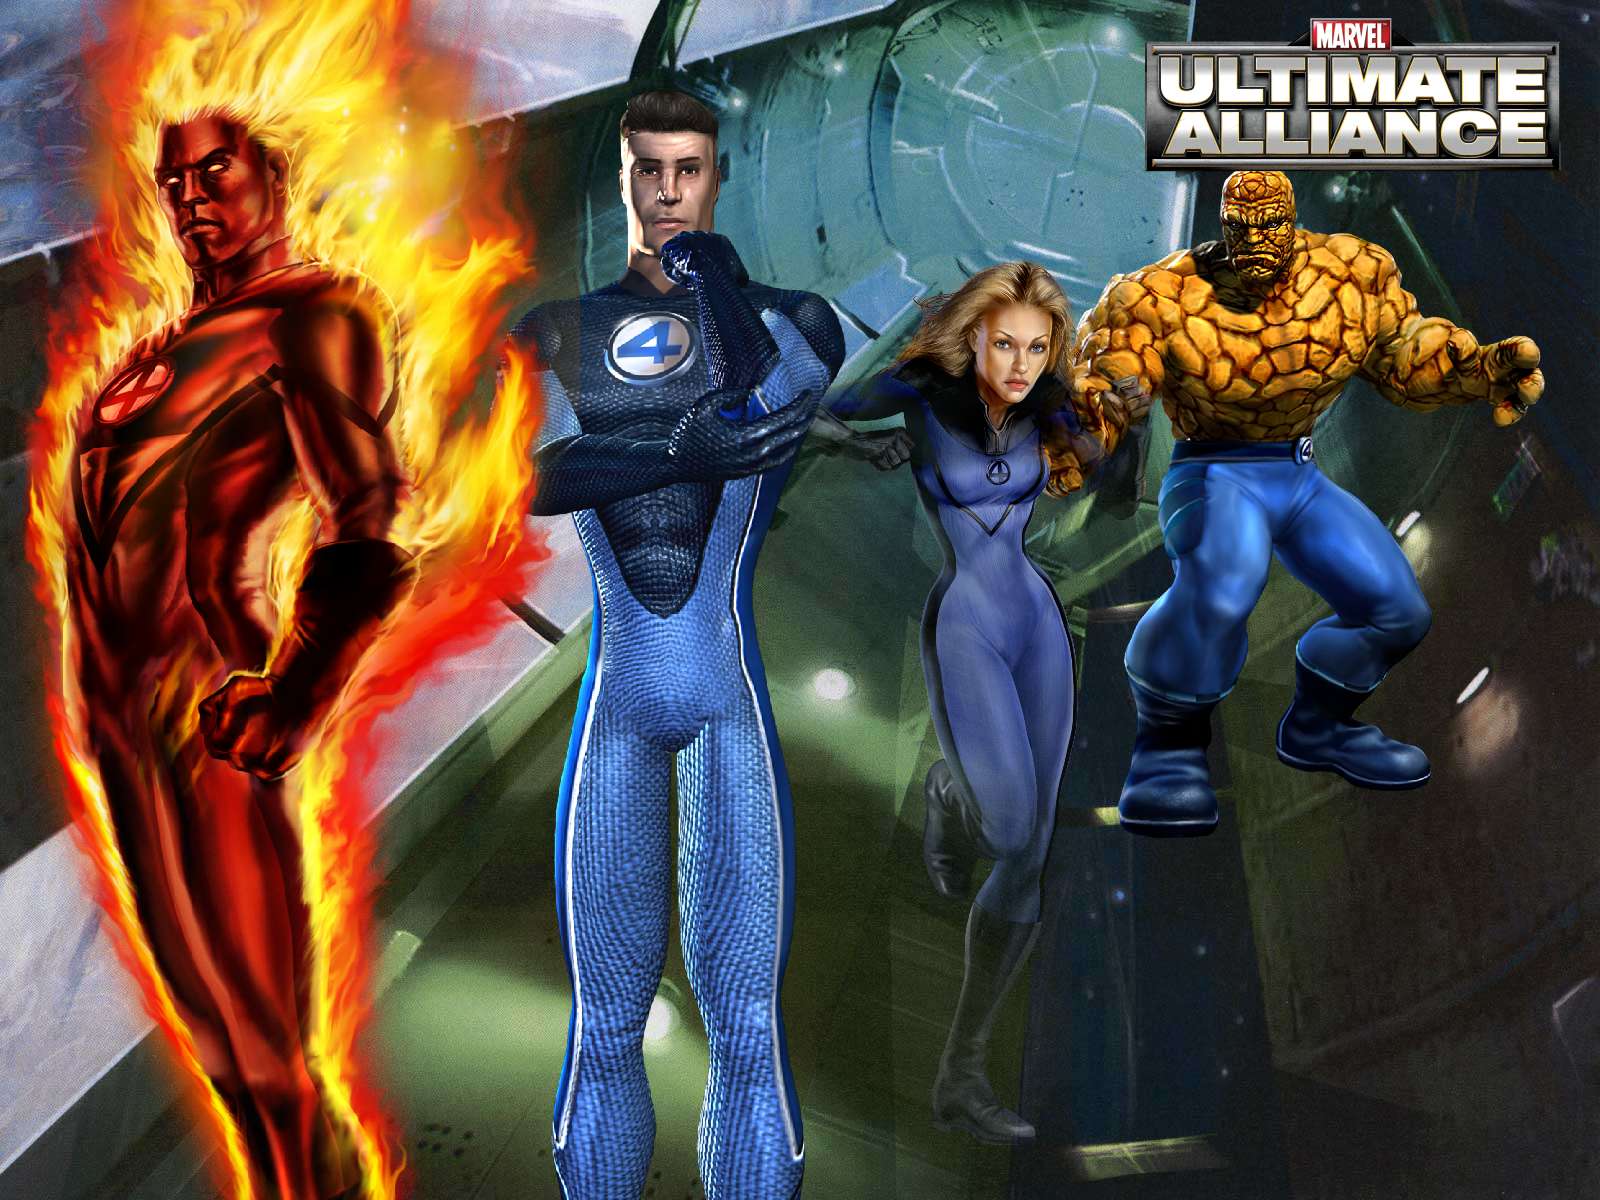 Fantastic four characters